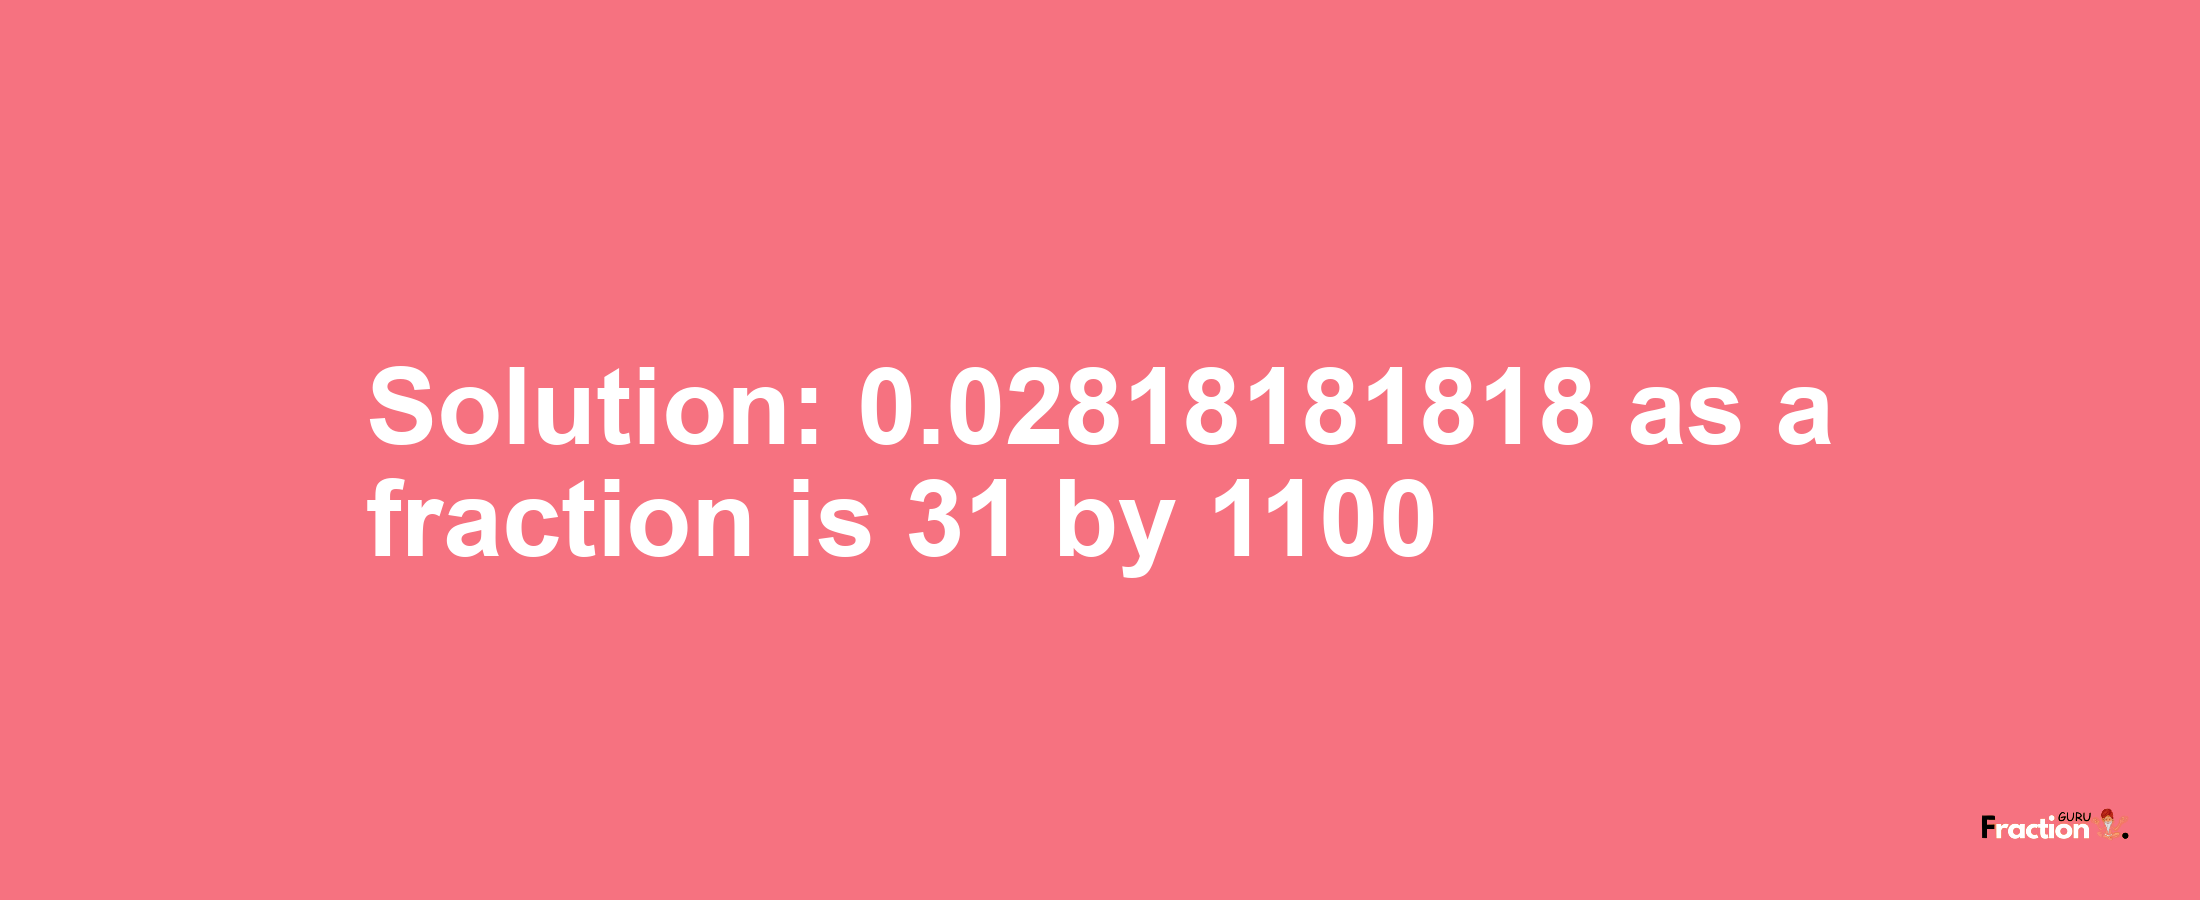 Solution:0.02818181818 as a fraction is 31/1100